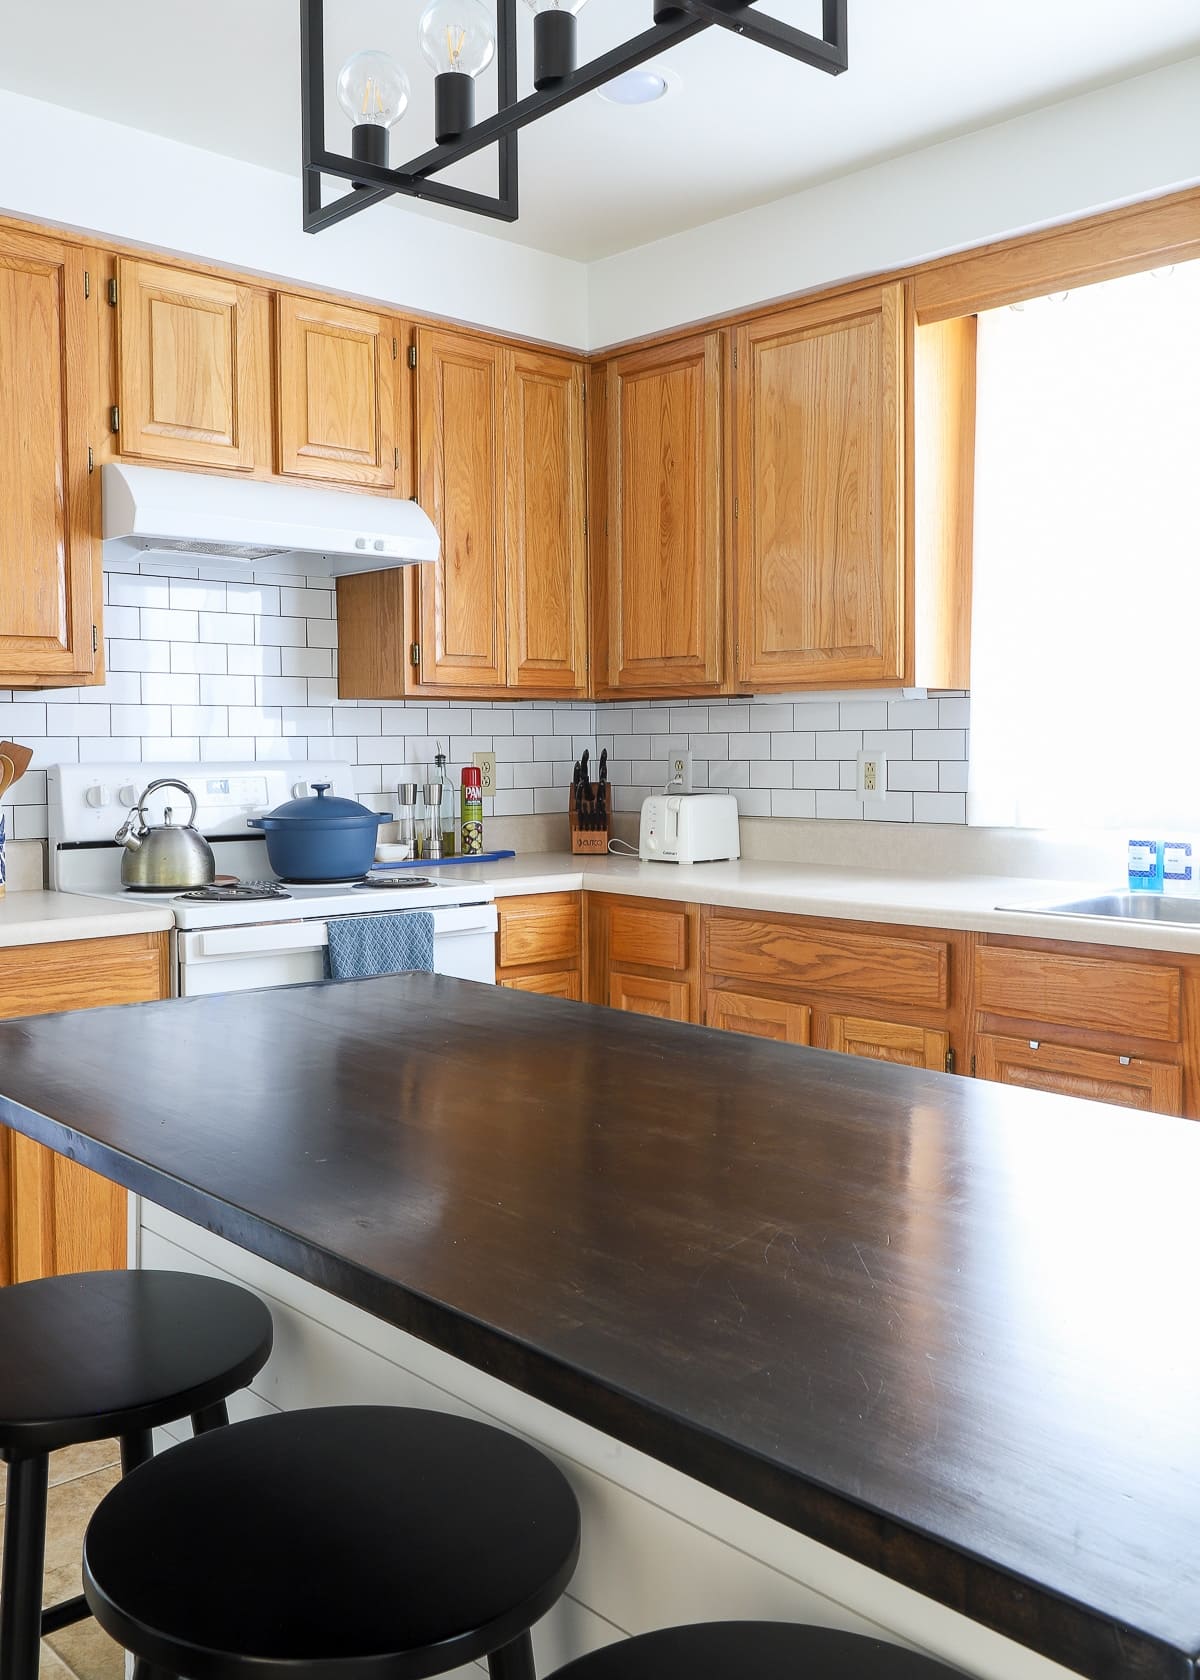 5 Quick Ways To Cover Kitchen Countertops (Without Replacing Them)